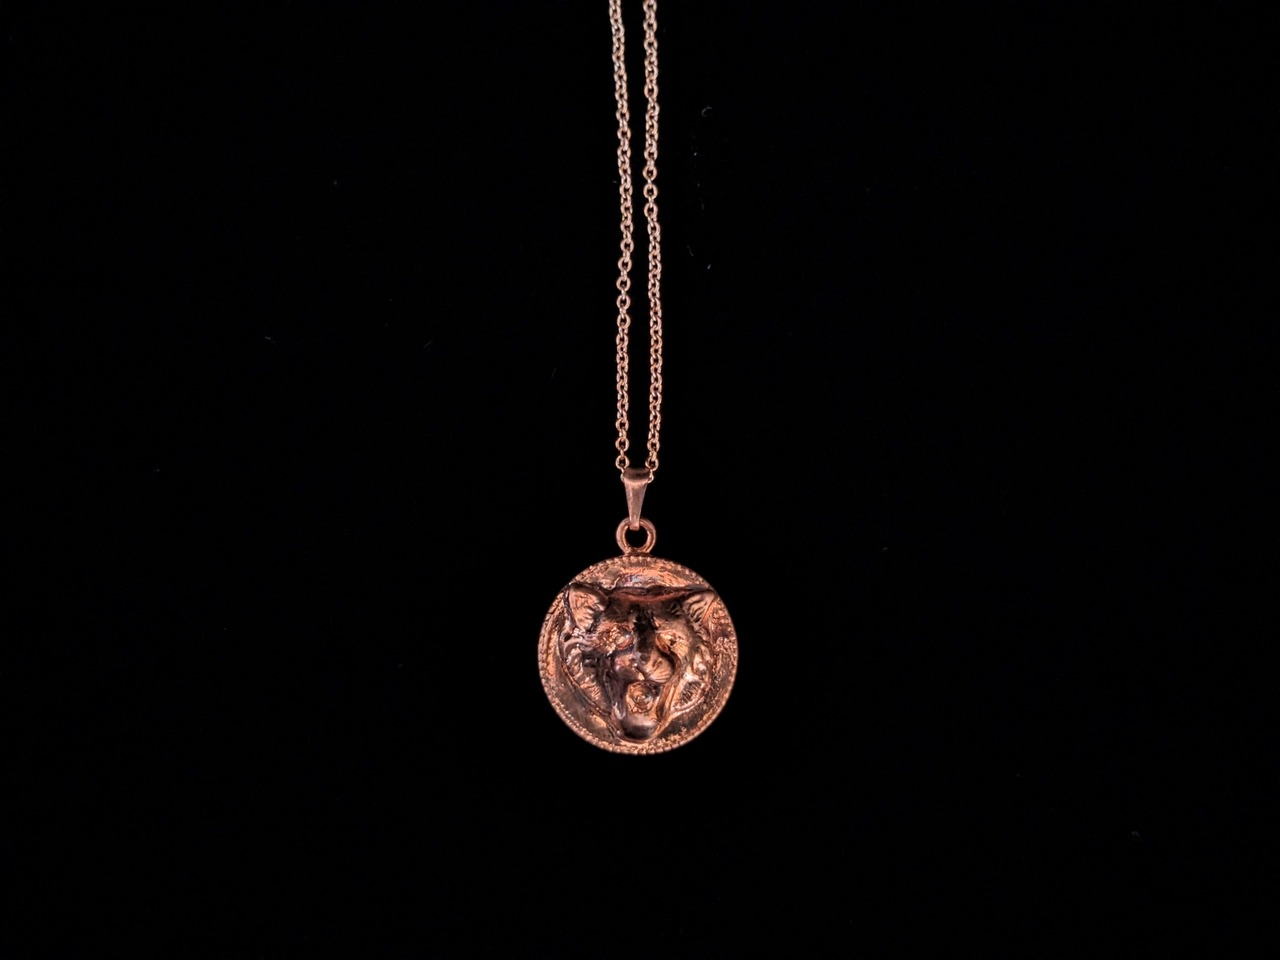 Dear TIGER ~親愛なる虎~ NECKLACE "THE COPPER COLLECTION"